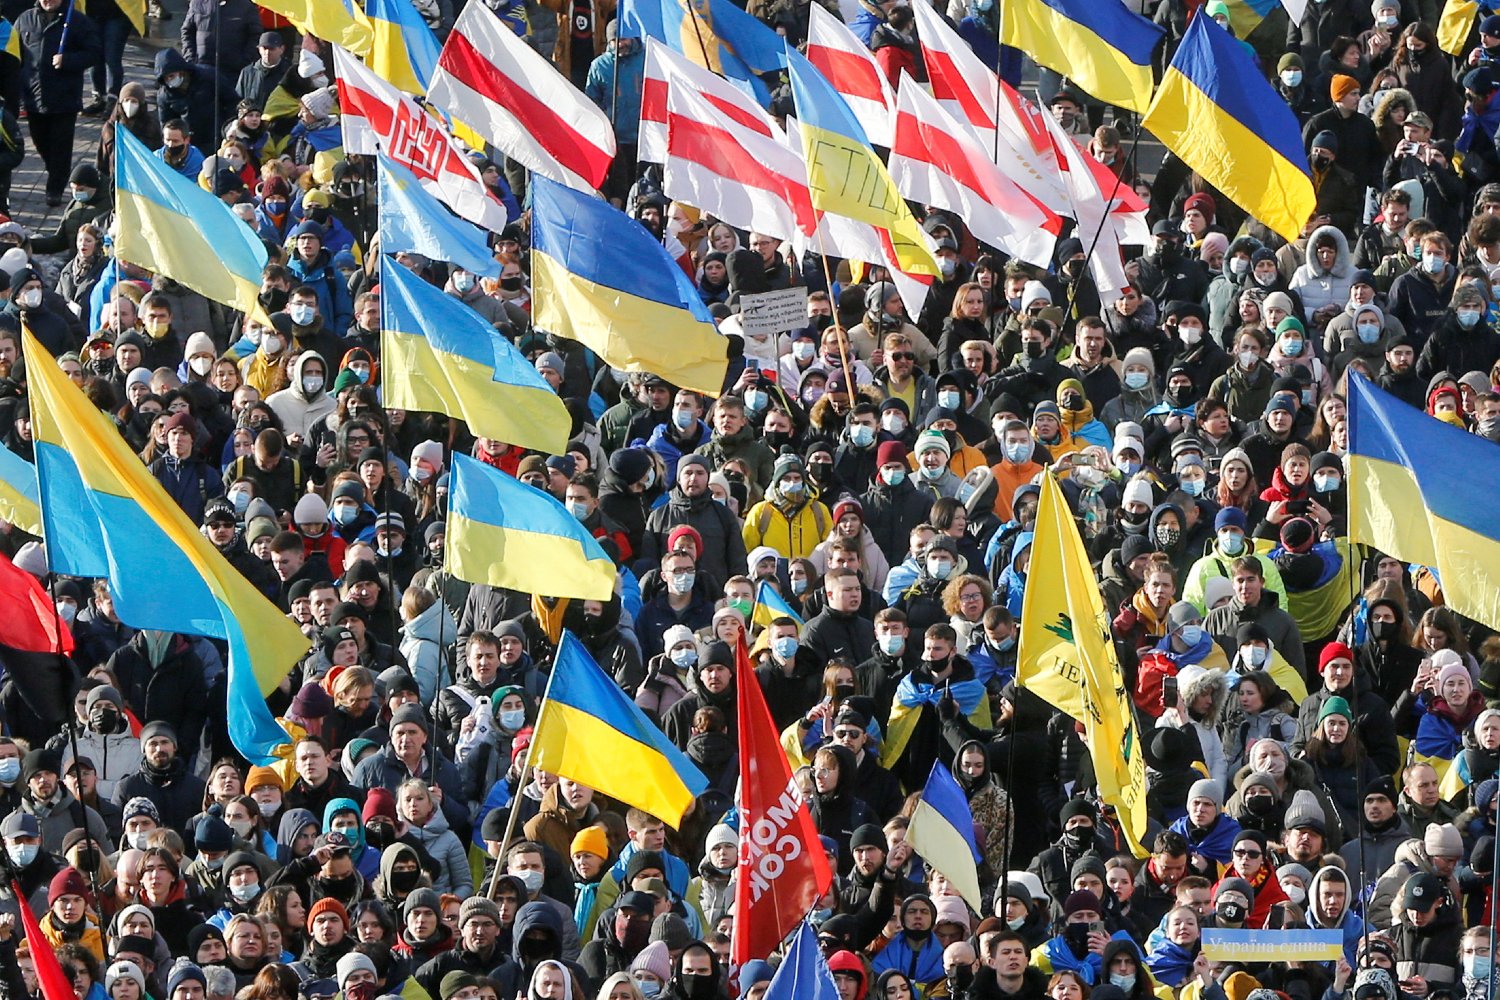 People take part in the Unity March, which is a procession to demonstrate Ukrainians' patriotic spirit amid growing tensions with Russia, in Kyiv, Ukraine February 12, 2022. Reuters/Valentyn Ogirenko